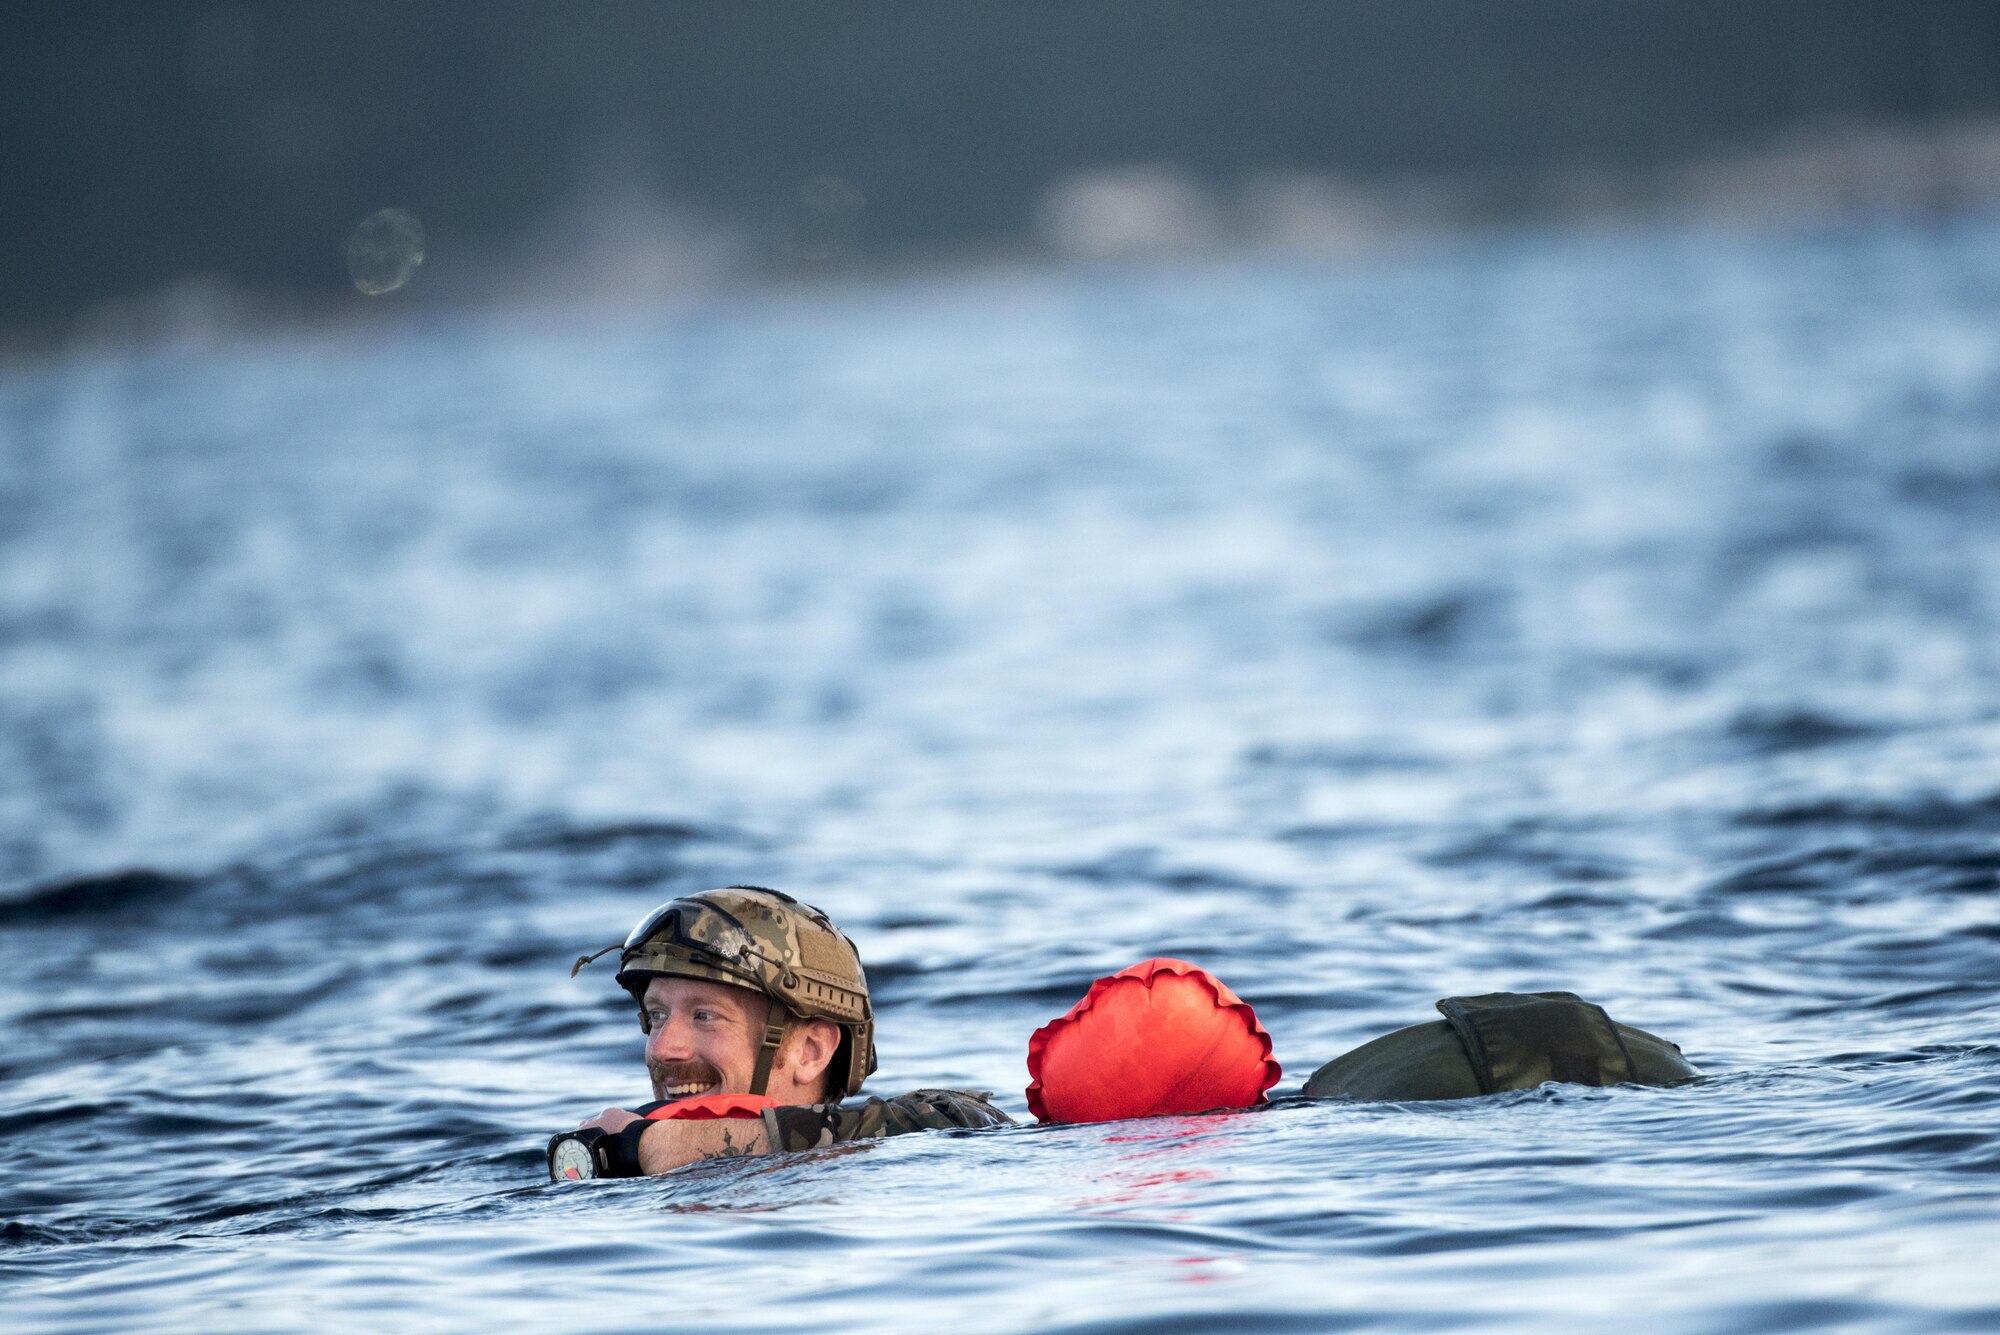 A U.S. Air Force Airman from the 320th Special Tactics Squadron swims to a vessel after performing a long-range jump from a C-17 Globemaster III into the Pacific Ocean Nov. 22, 2016. The 320th STS has combat controllers, pararescuemen and special operations weather teams who go anywhere and set up forward operating locations and impromptu runways. (U.S. Air Force photo by Senior Airman Omari Bernard/Released)